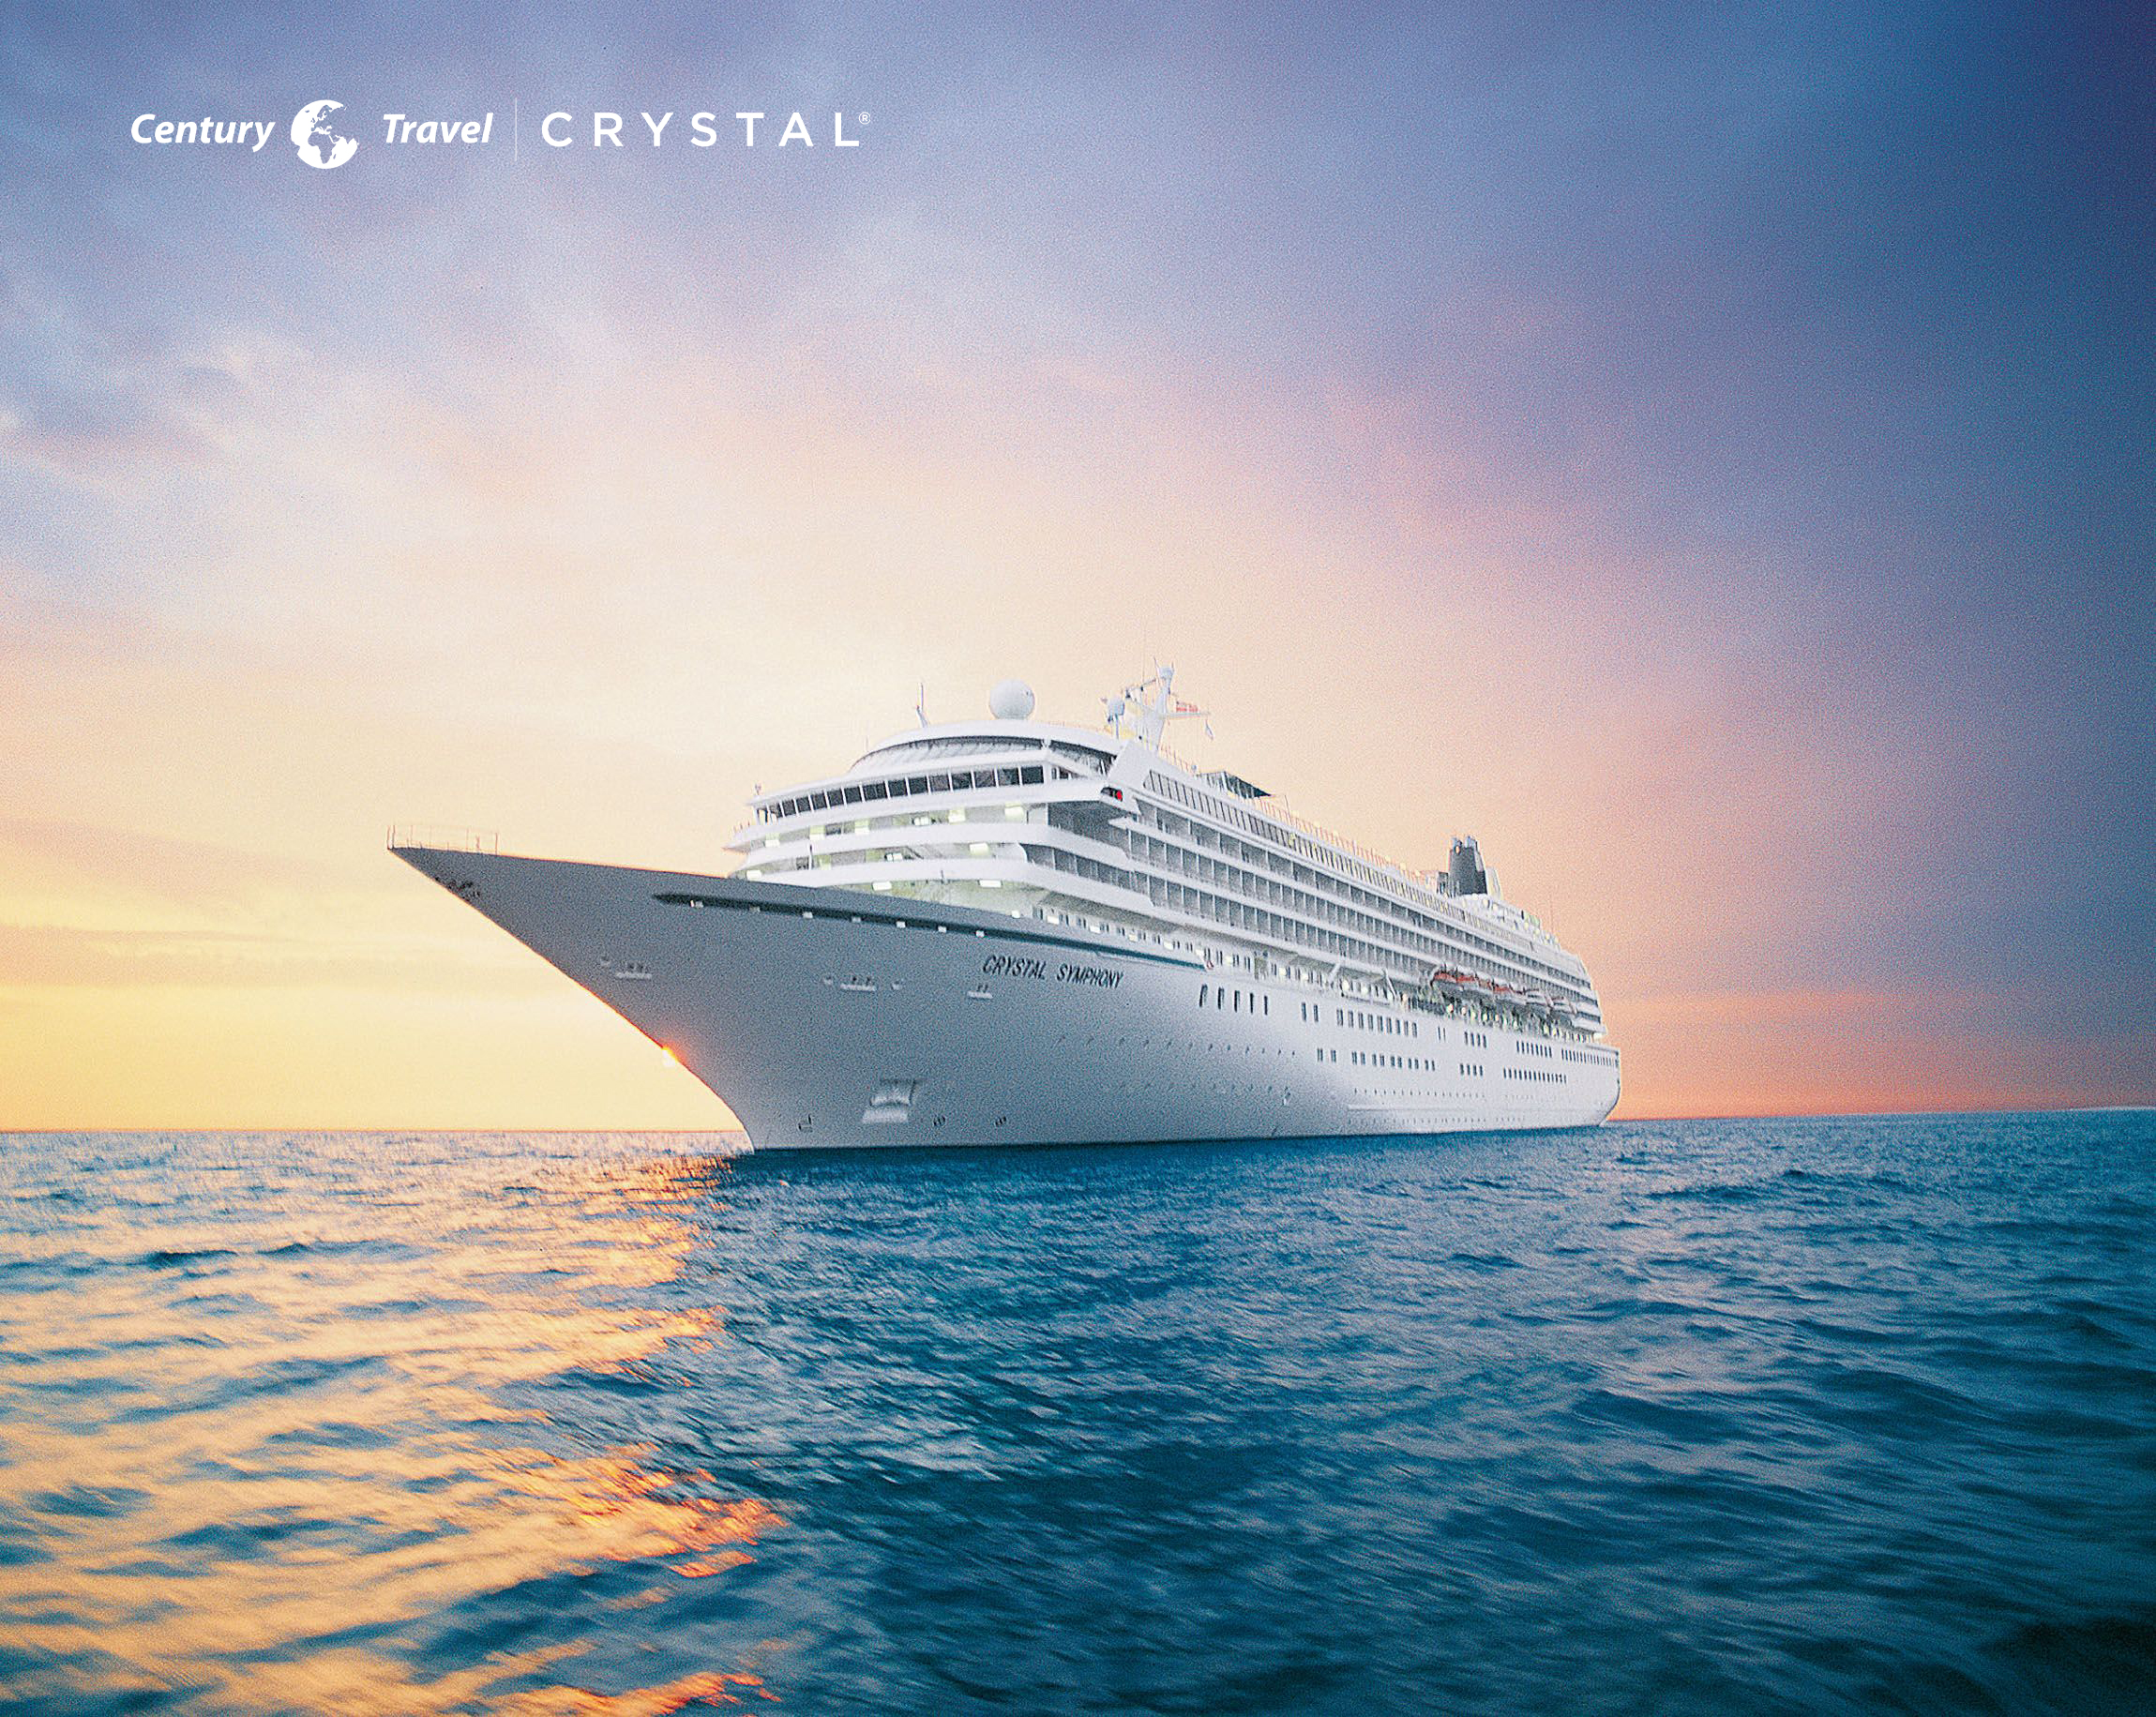 Century Travel: 6 Star Crystal announce two groundbreaking new ships